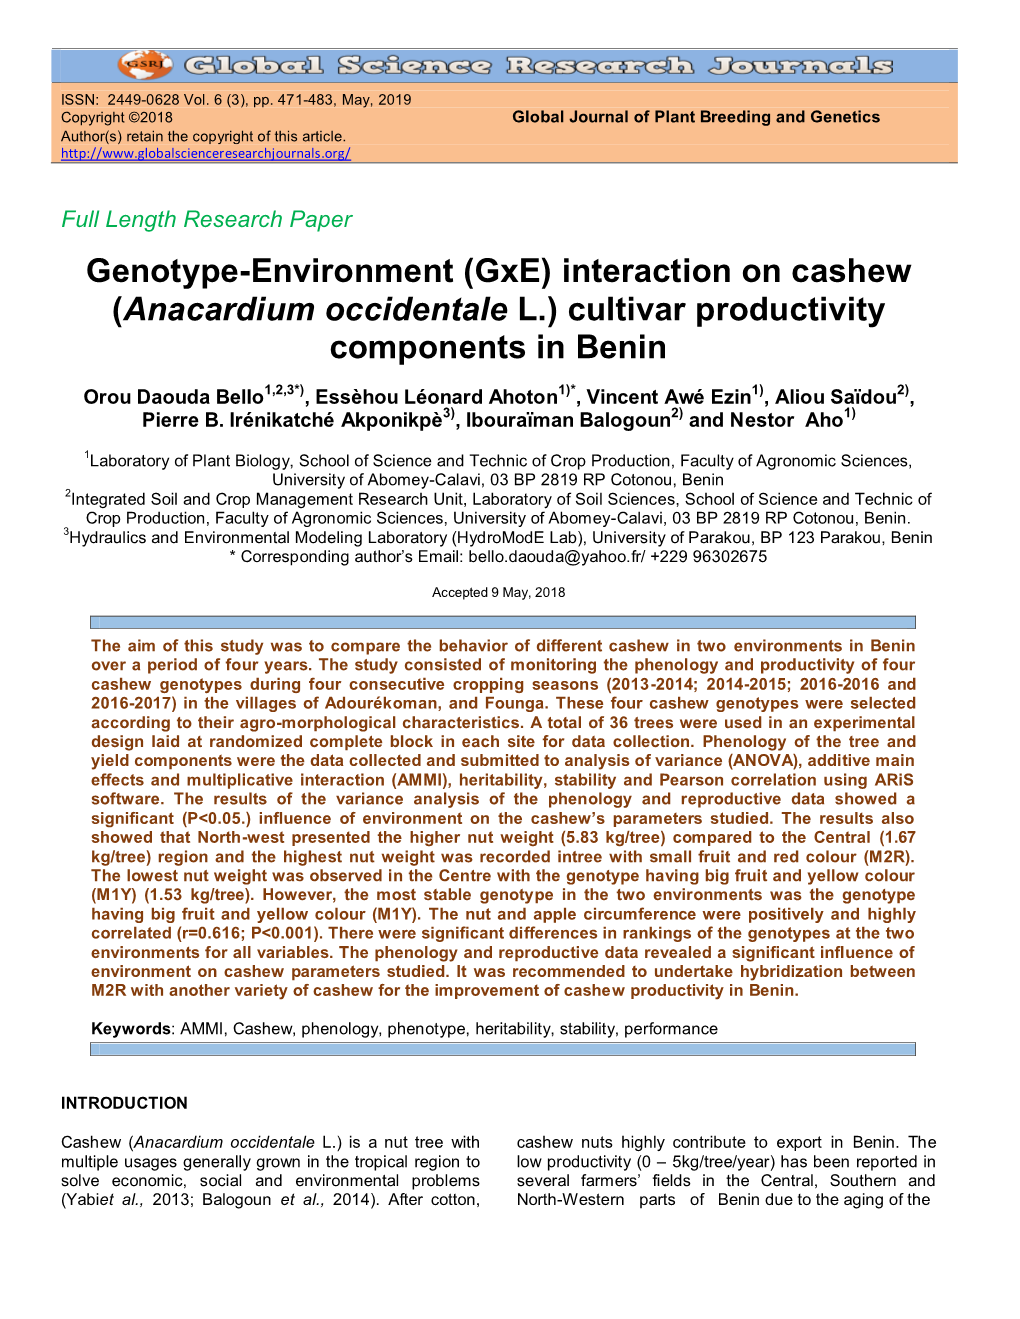 (Gxe) Interaction on Cashew (Anacardium Occidentale L.) Cultivar Productivity Components in Benin